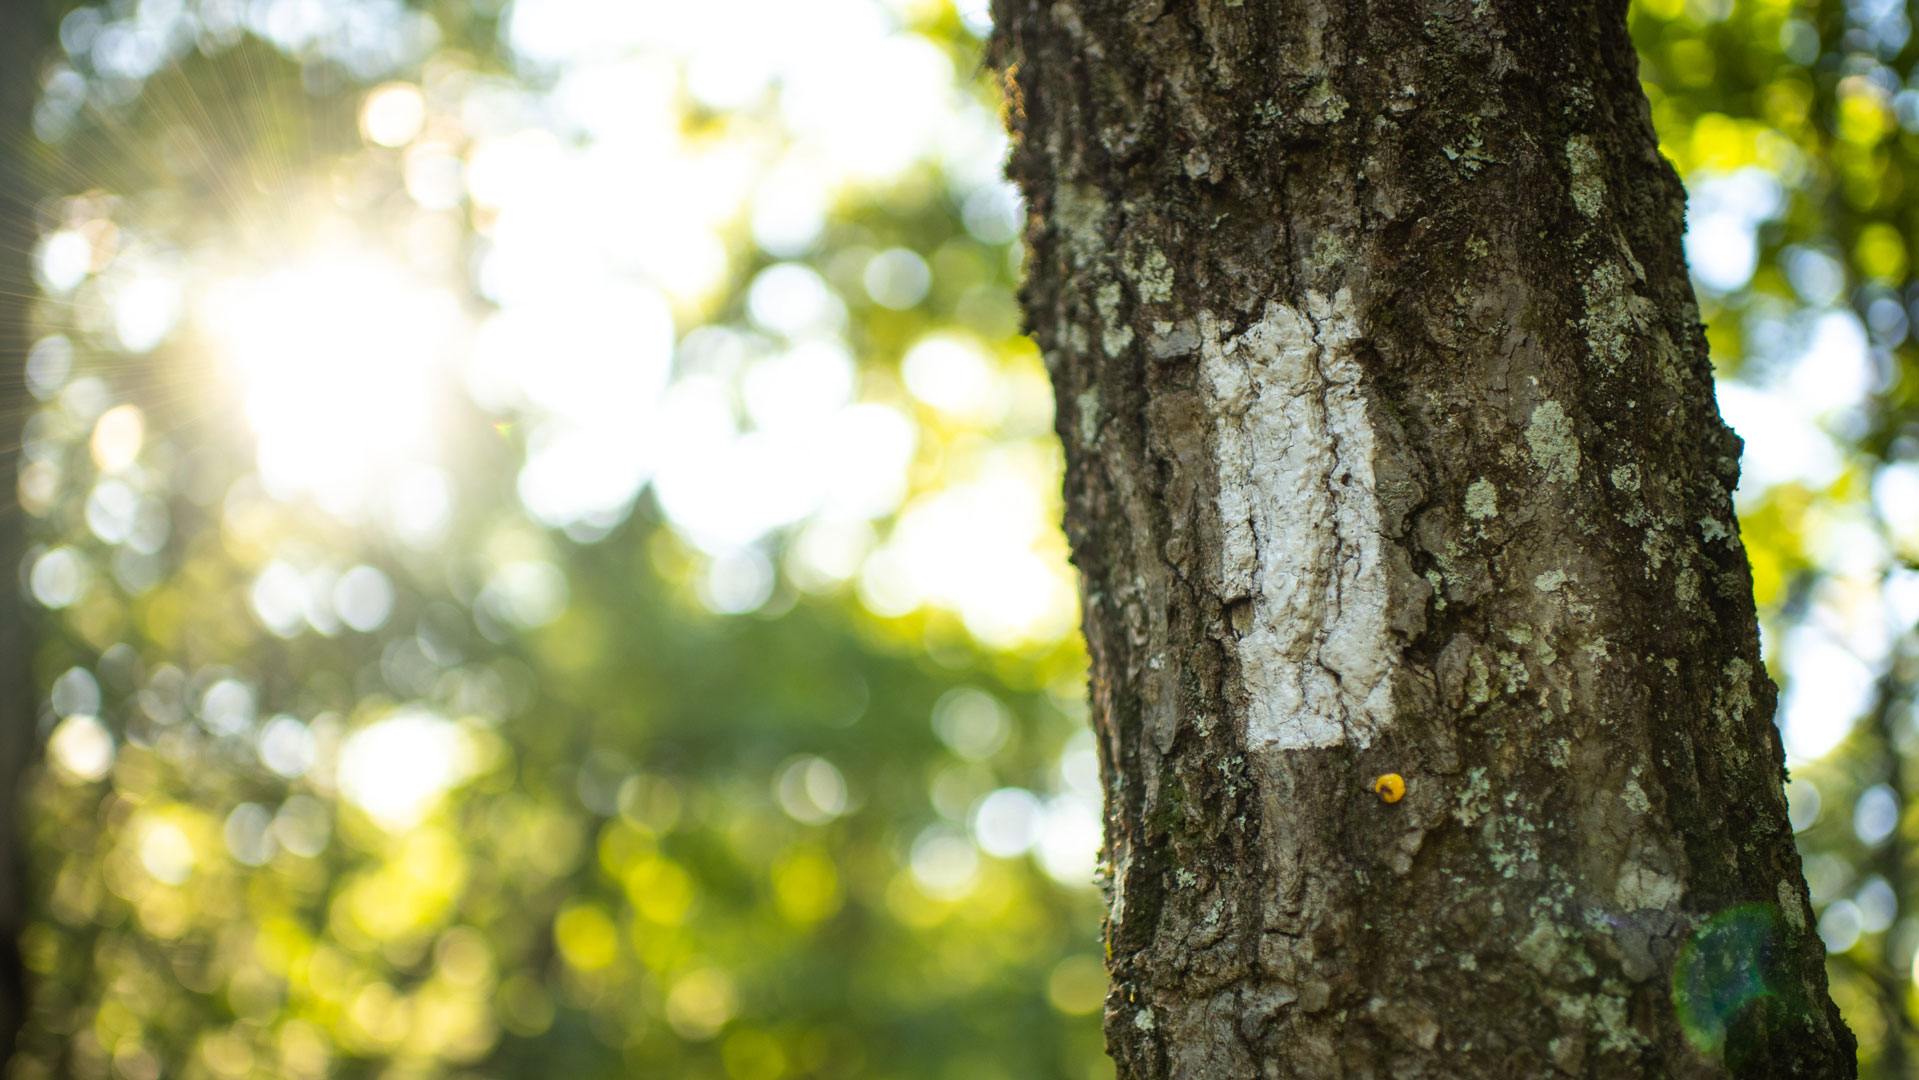 White blazes mark the entire length of the Appalachian Trail